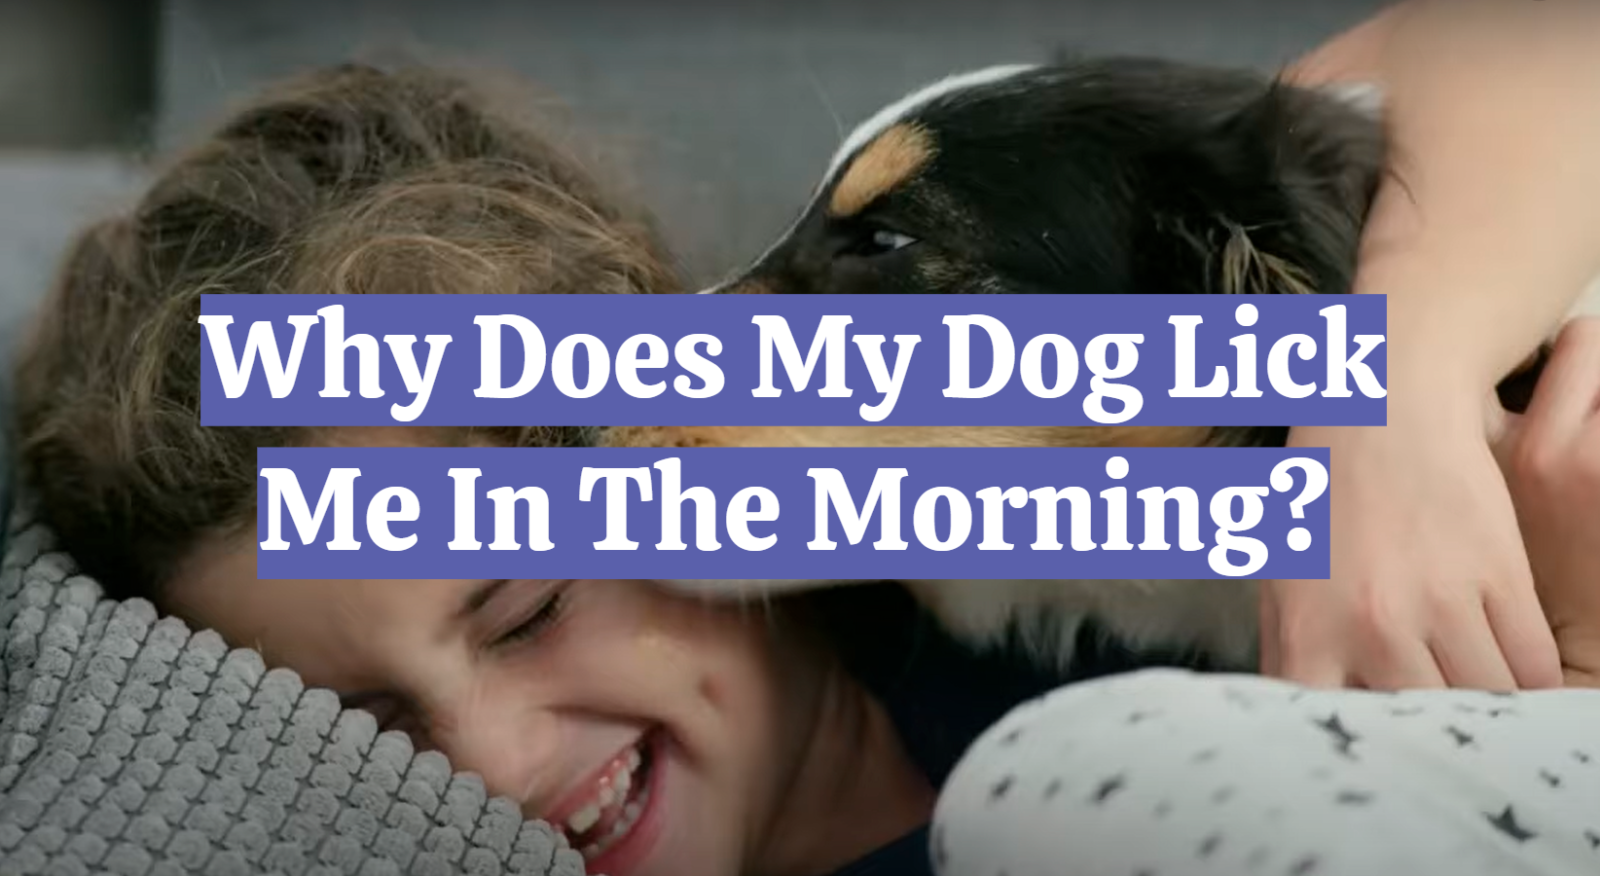 Why Does My Dog Lick Me In The Morning?